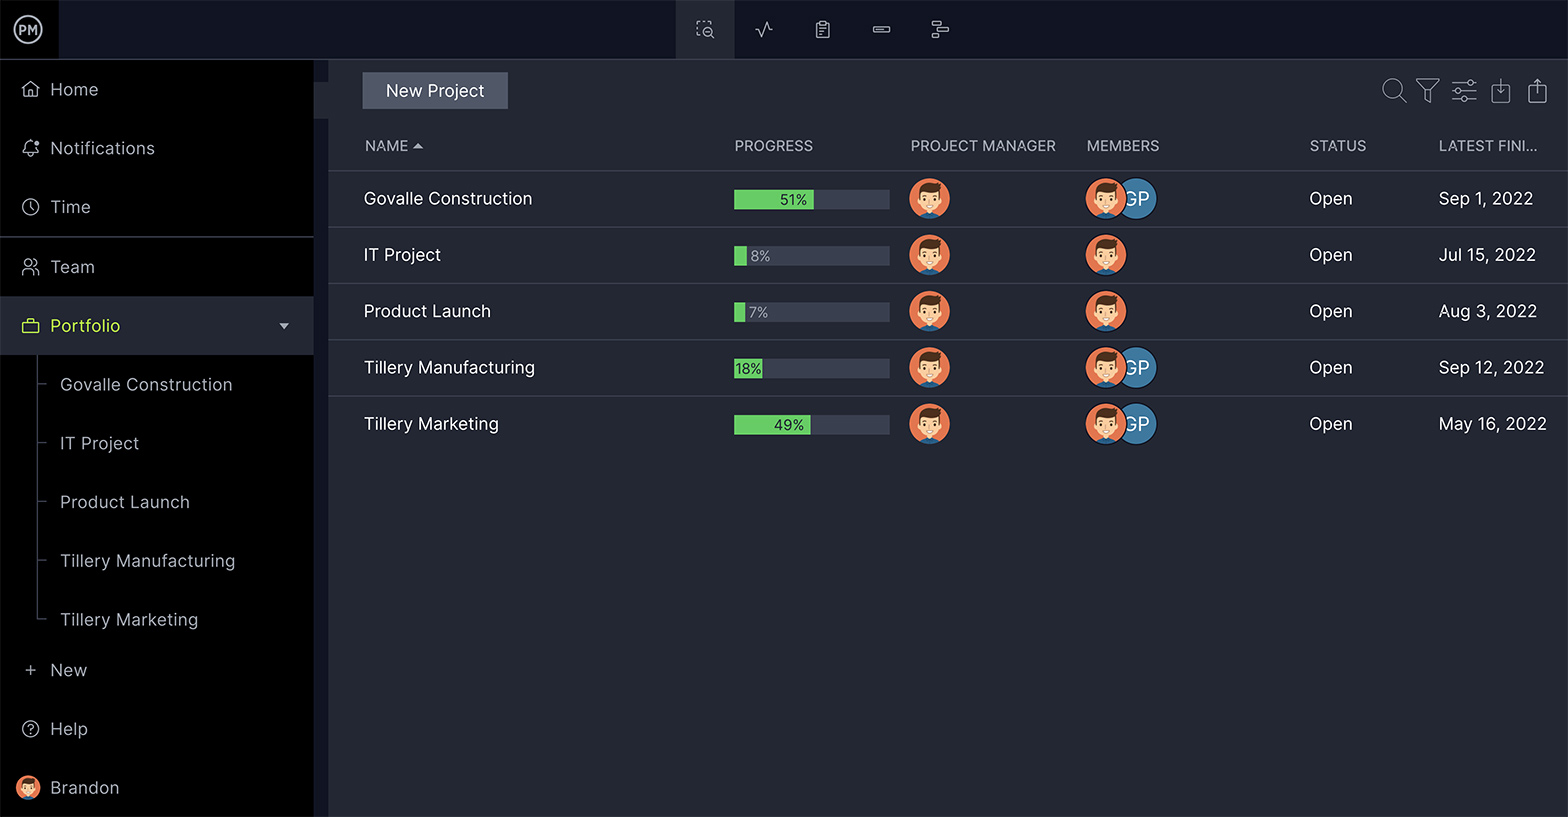 ProjectManager's portfolio management dashboard, ideal to communicate project status report